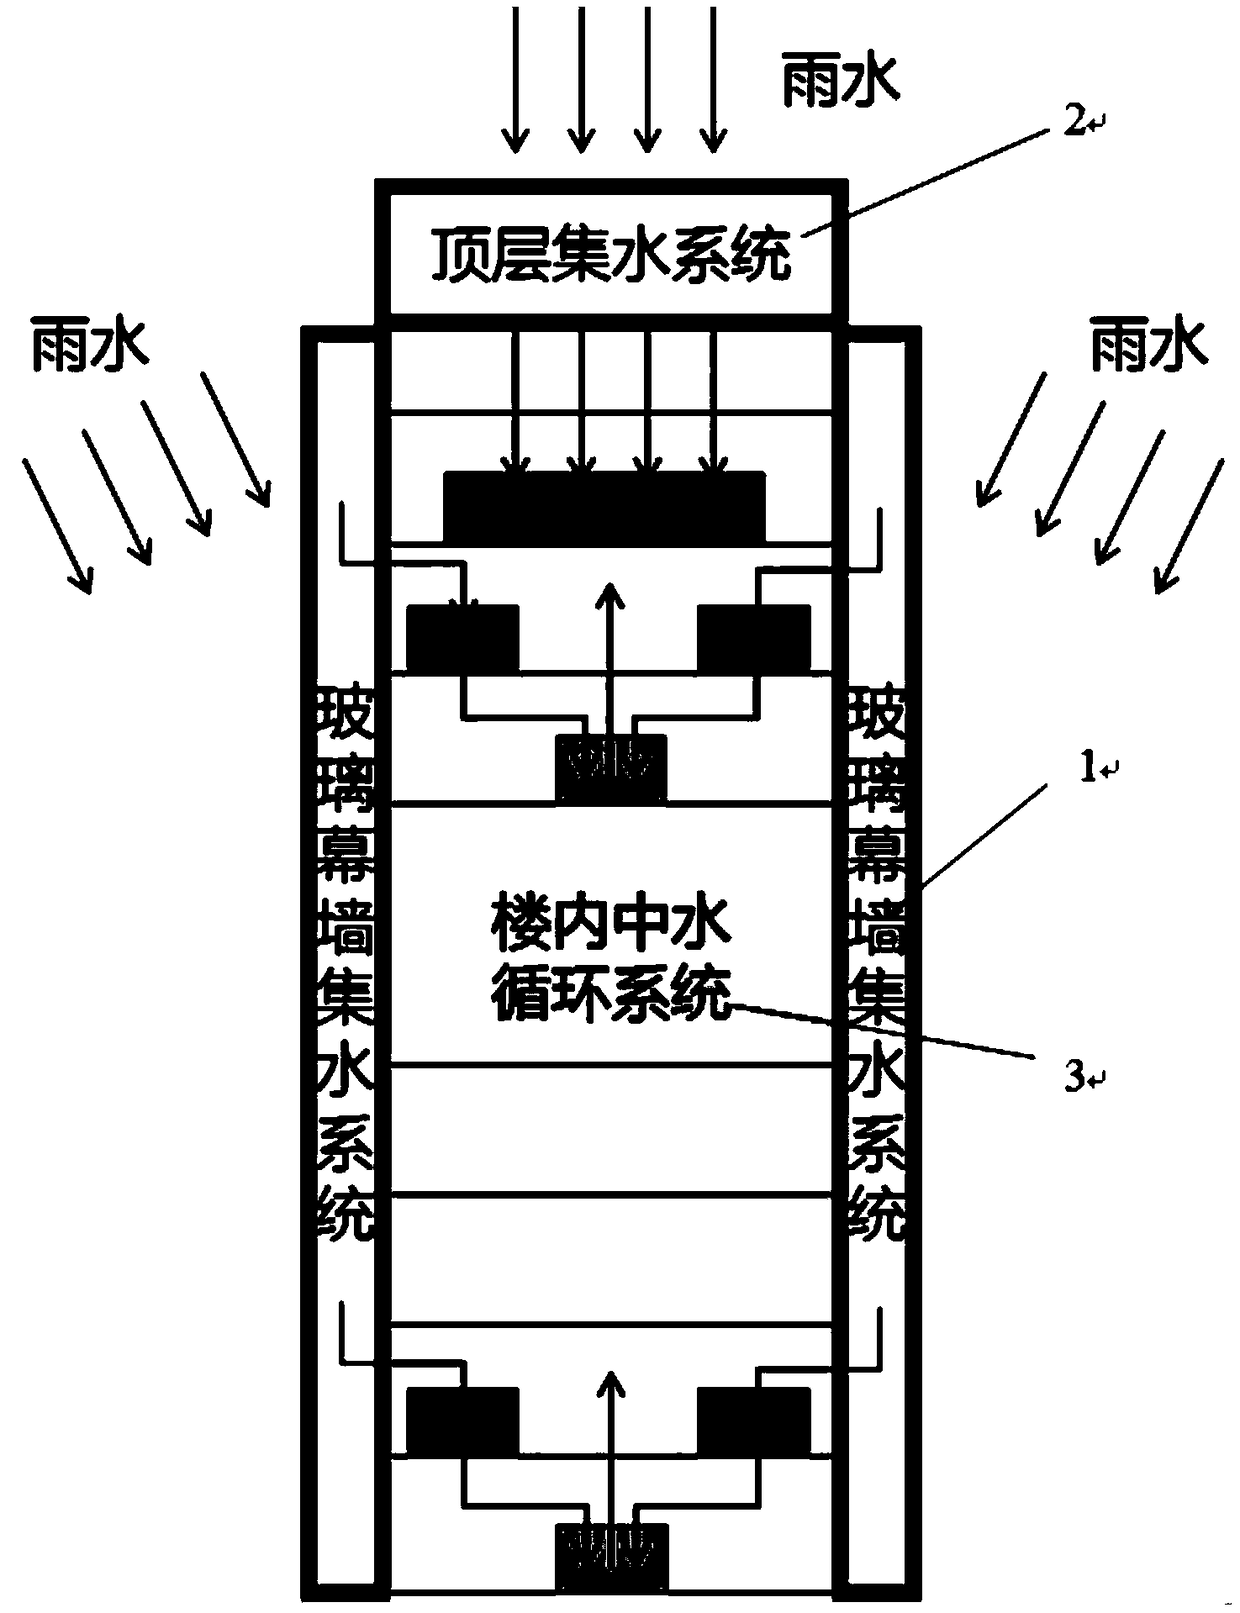 High-rise building rainwater collecting self-circulation utilization system